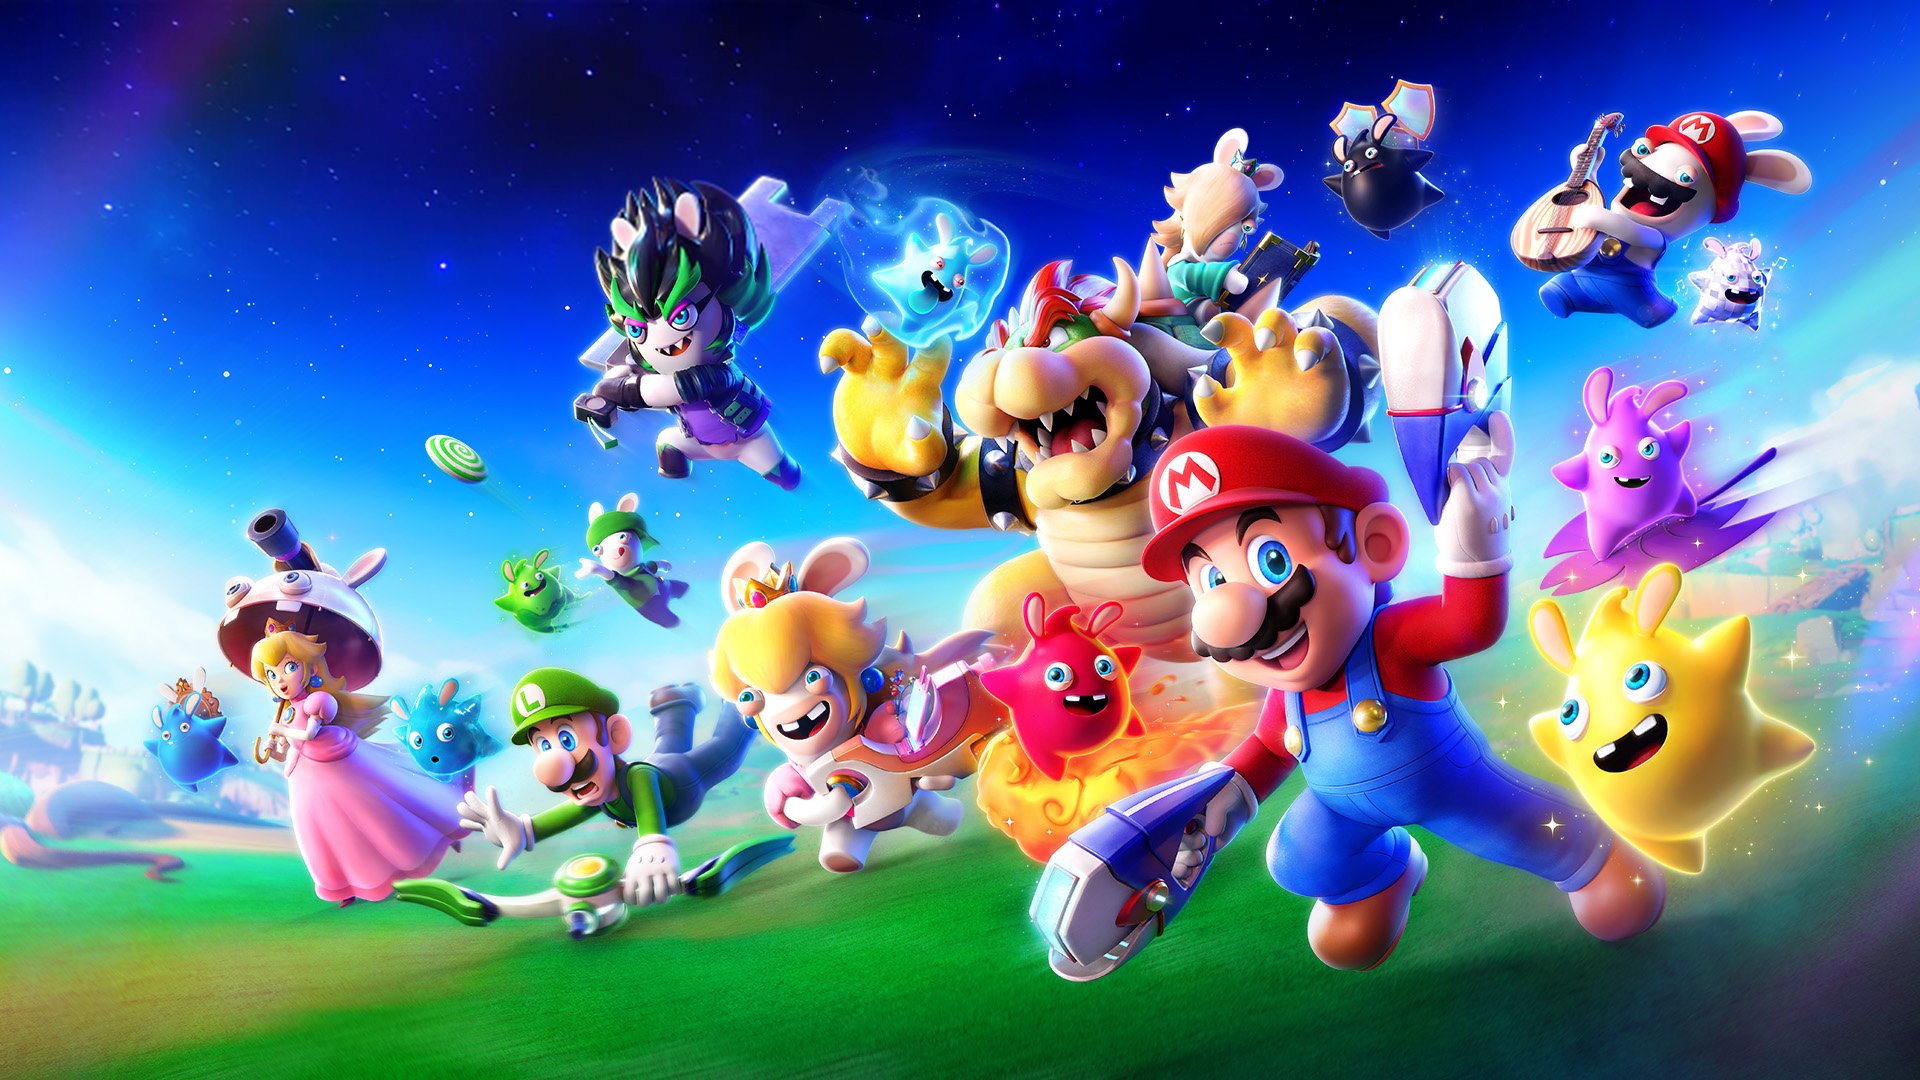 Rayman's Mario + Rabbids Sparks of Hope DLC gets August release date